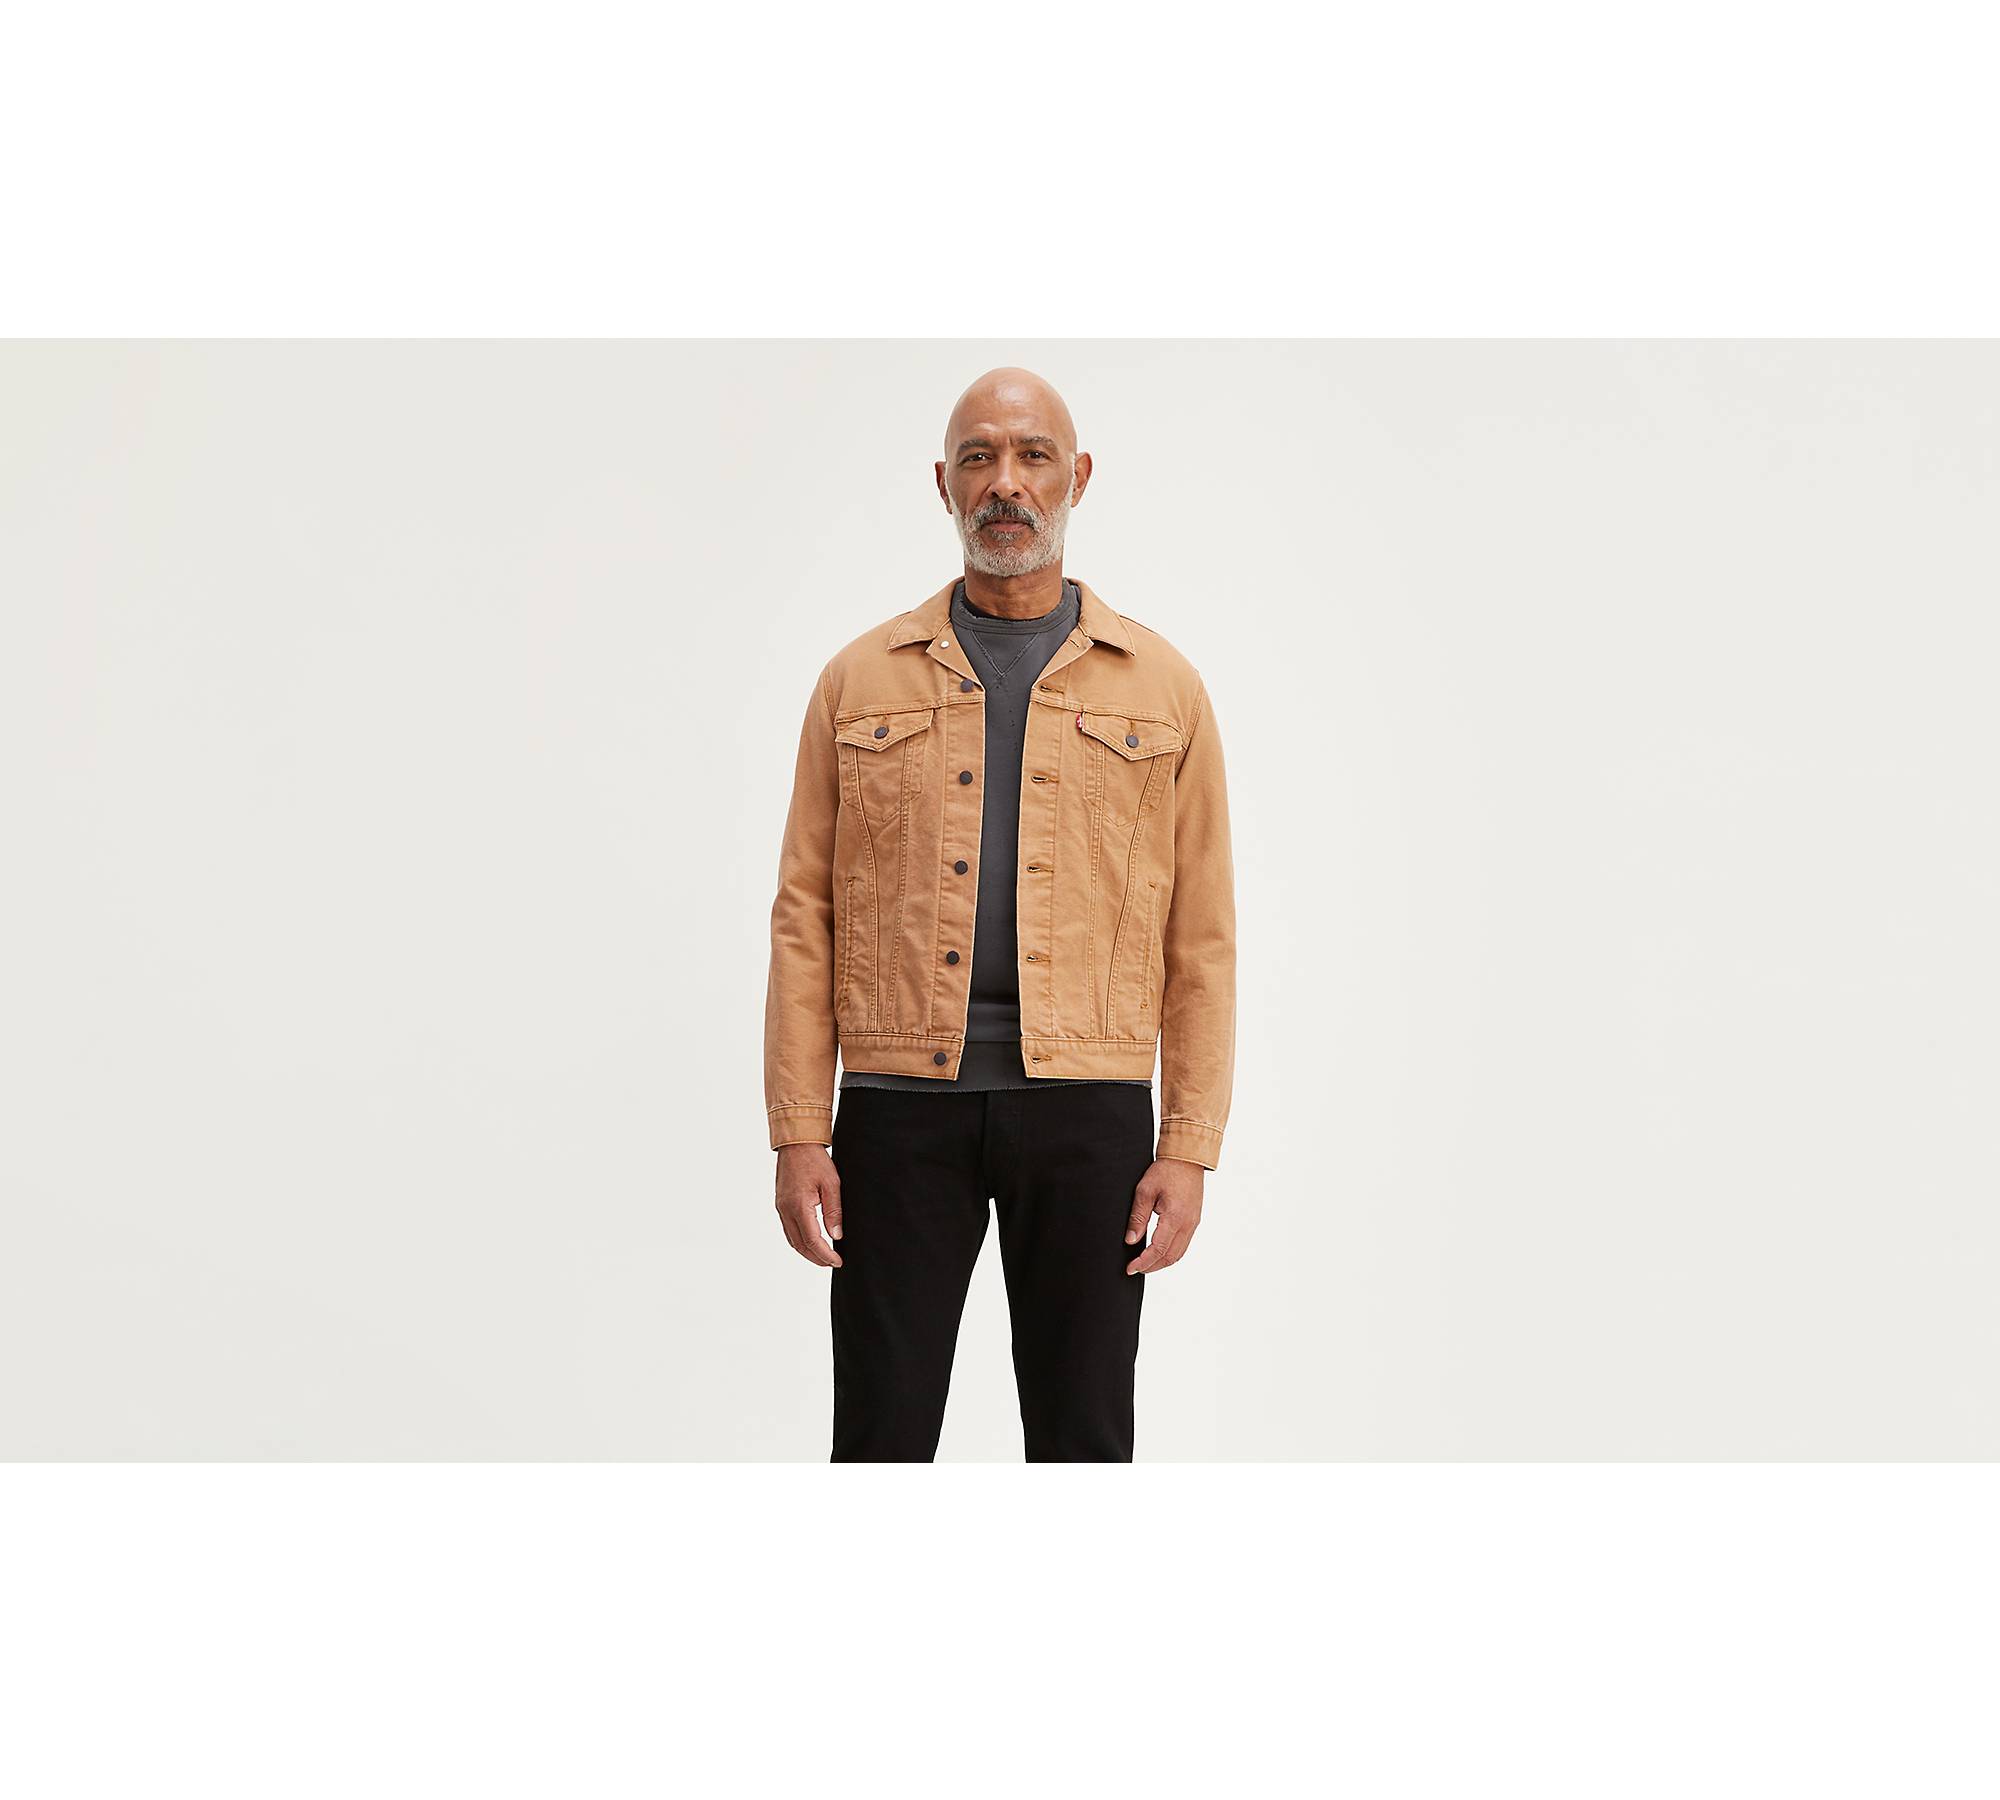 Leather Jackets For Men To Own This Fall « VOGA-NOW